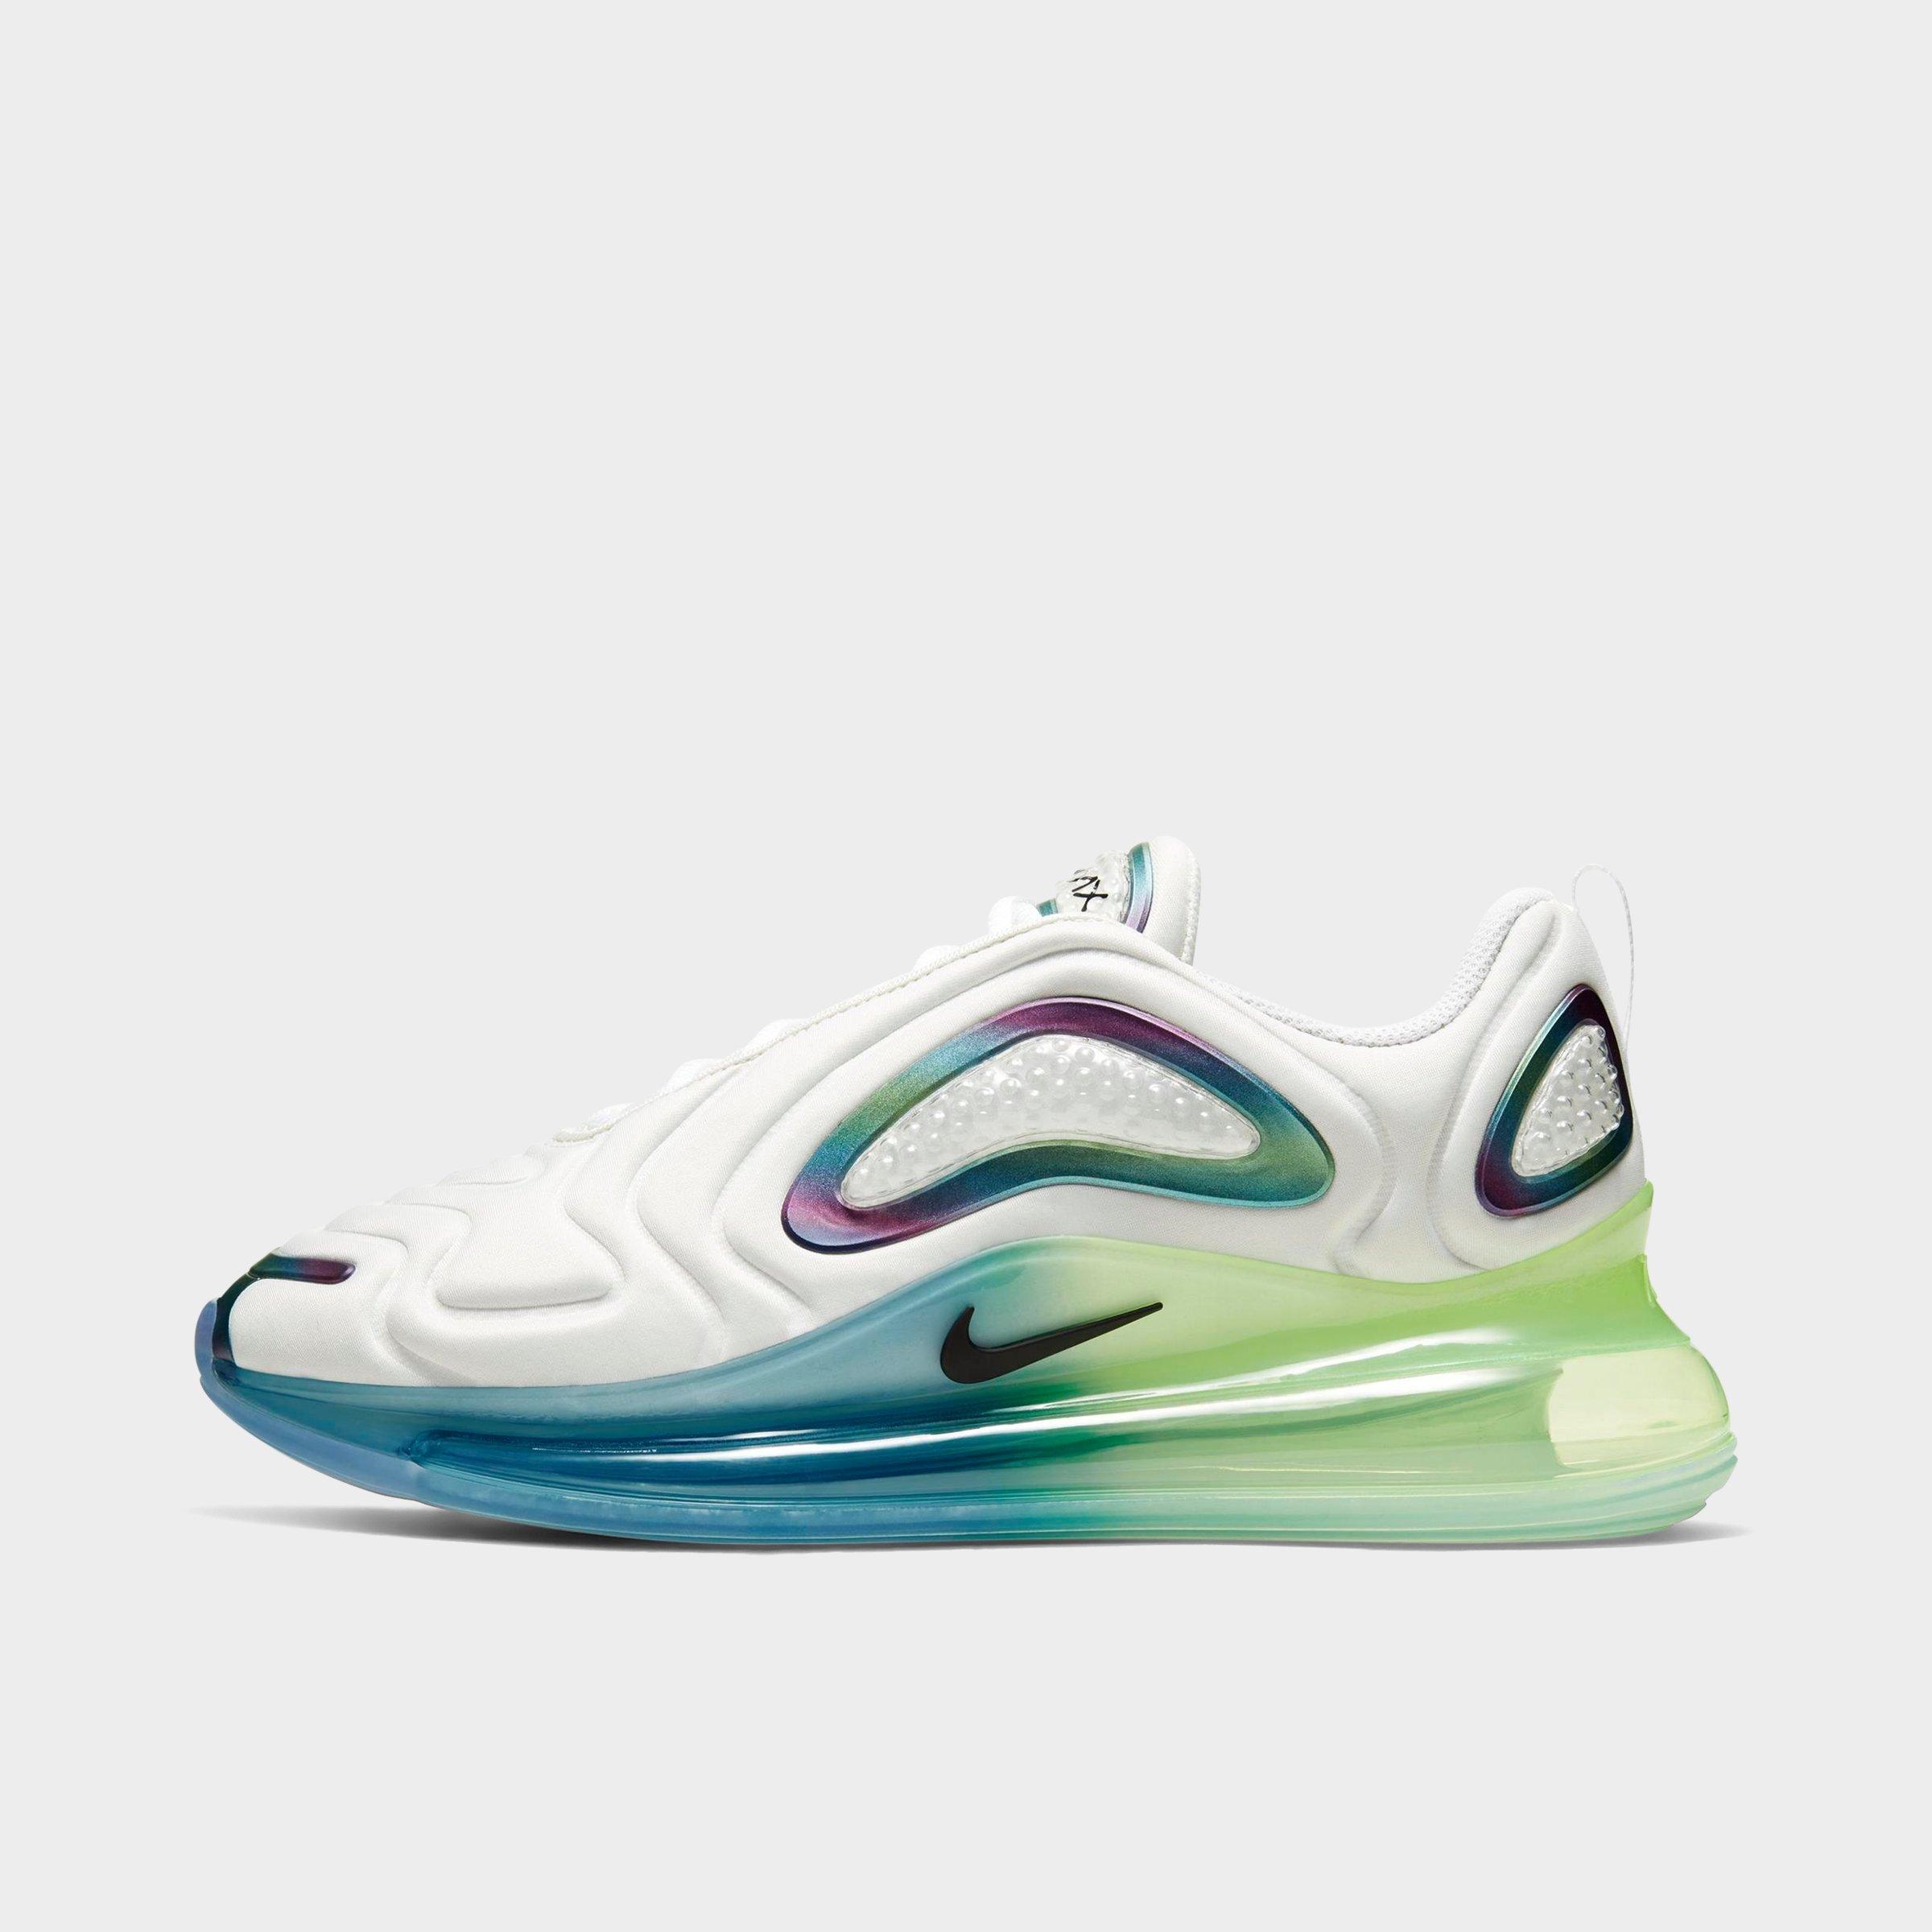 Men's Nike Air Max 720 20 Running Shoes| Finish Line